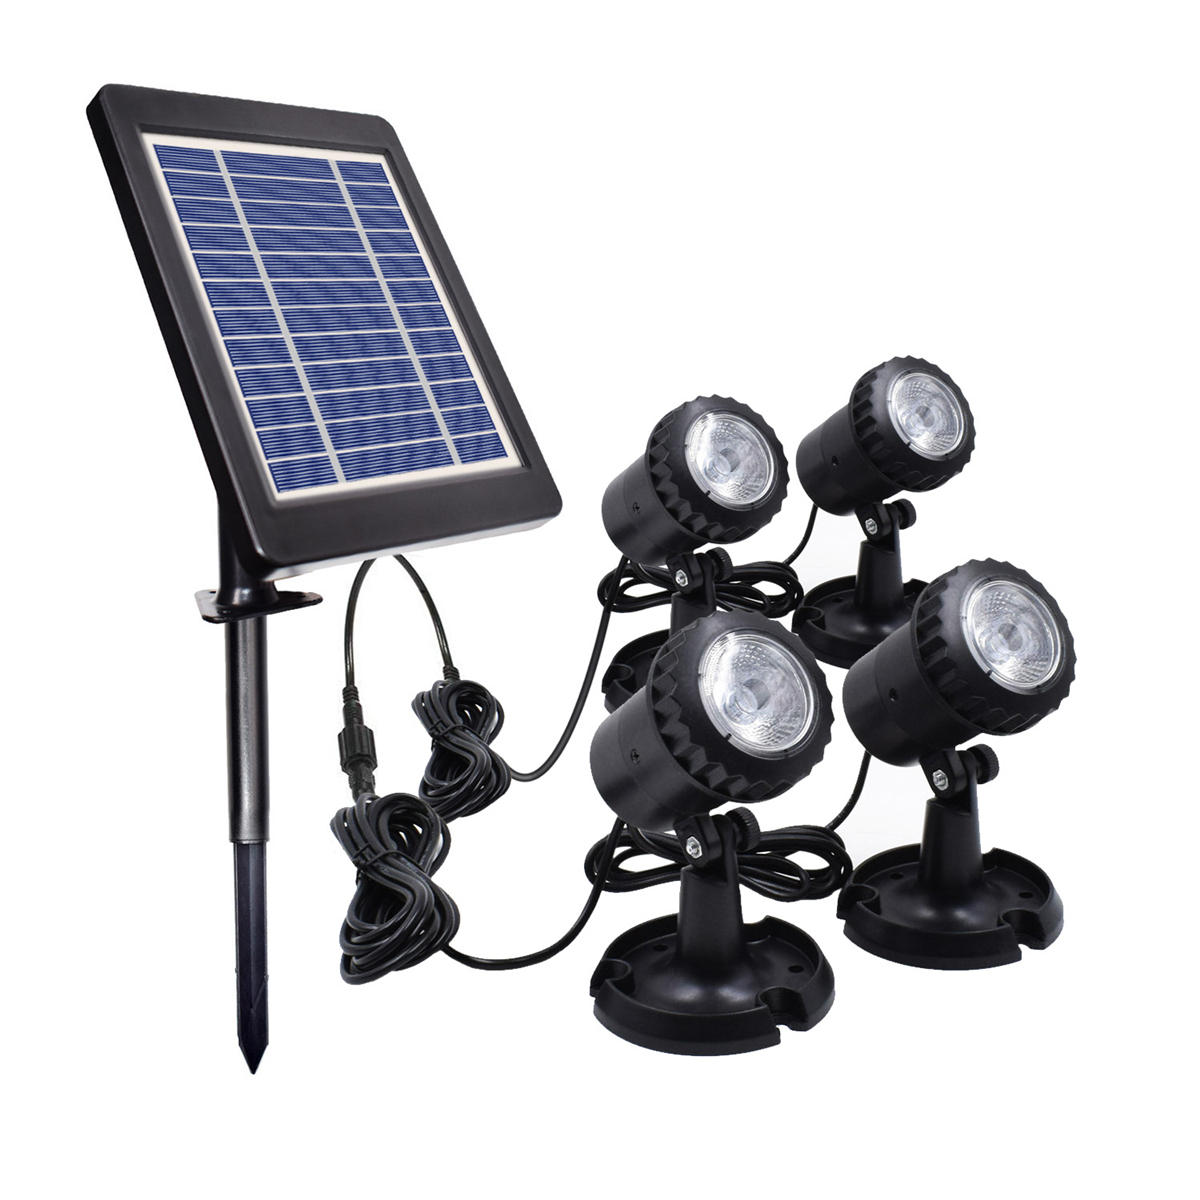 IP68 4 in1 Waterproof Underwater Fountain Pond Lights Solar Light LED Spotlights With Green/Blue/White Lamps For Outdoor Amphibious Lawn Pool Garden Path Aquarium